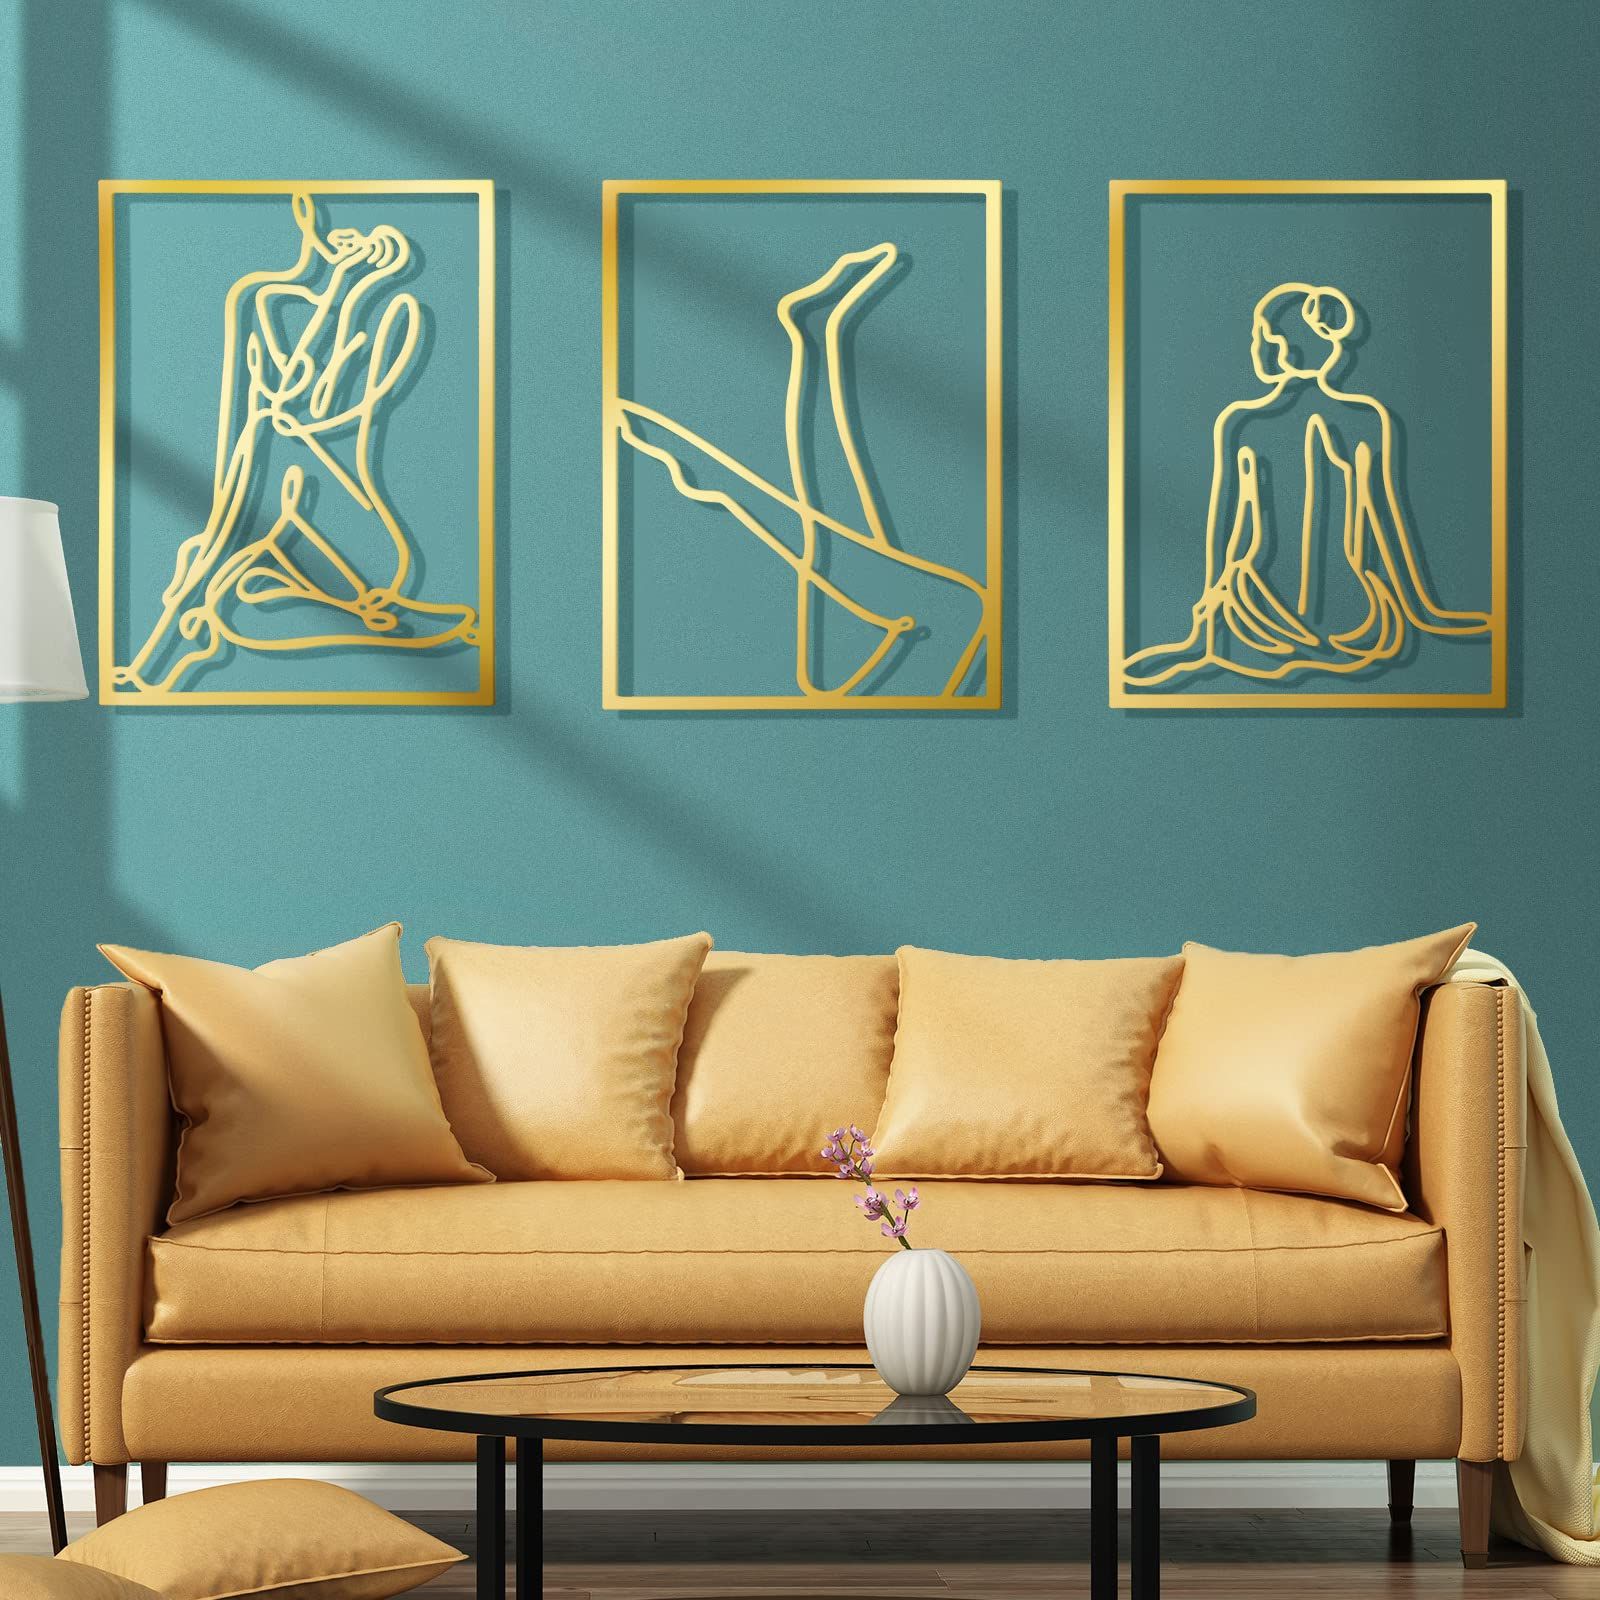 Trendy Large Single Line Metal Wall Art For Amazon: Set Of 3 Metal Wall Art Decor 15x12 Inch Modern Abstract Wall  Art Minimalist Wall Decor Large Rustic Wall Sculptures Single Line Decor  Accents Hanging Women's Body Outline Poster (gold, Modern (View 10 of 15)